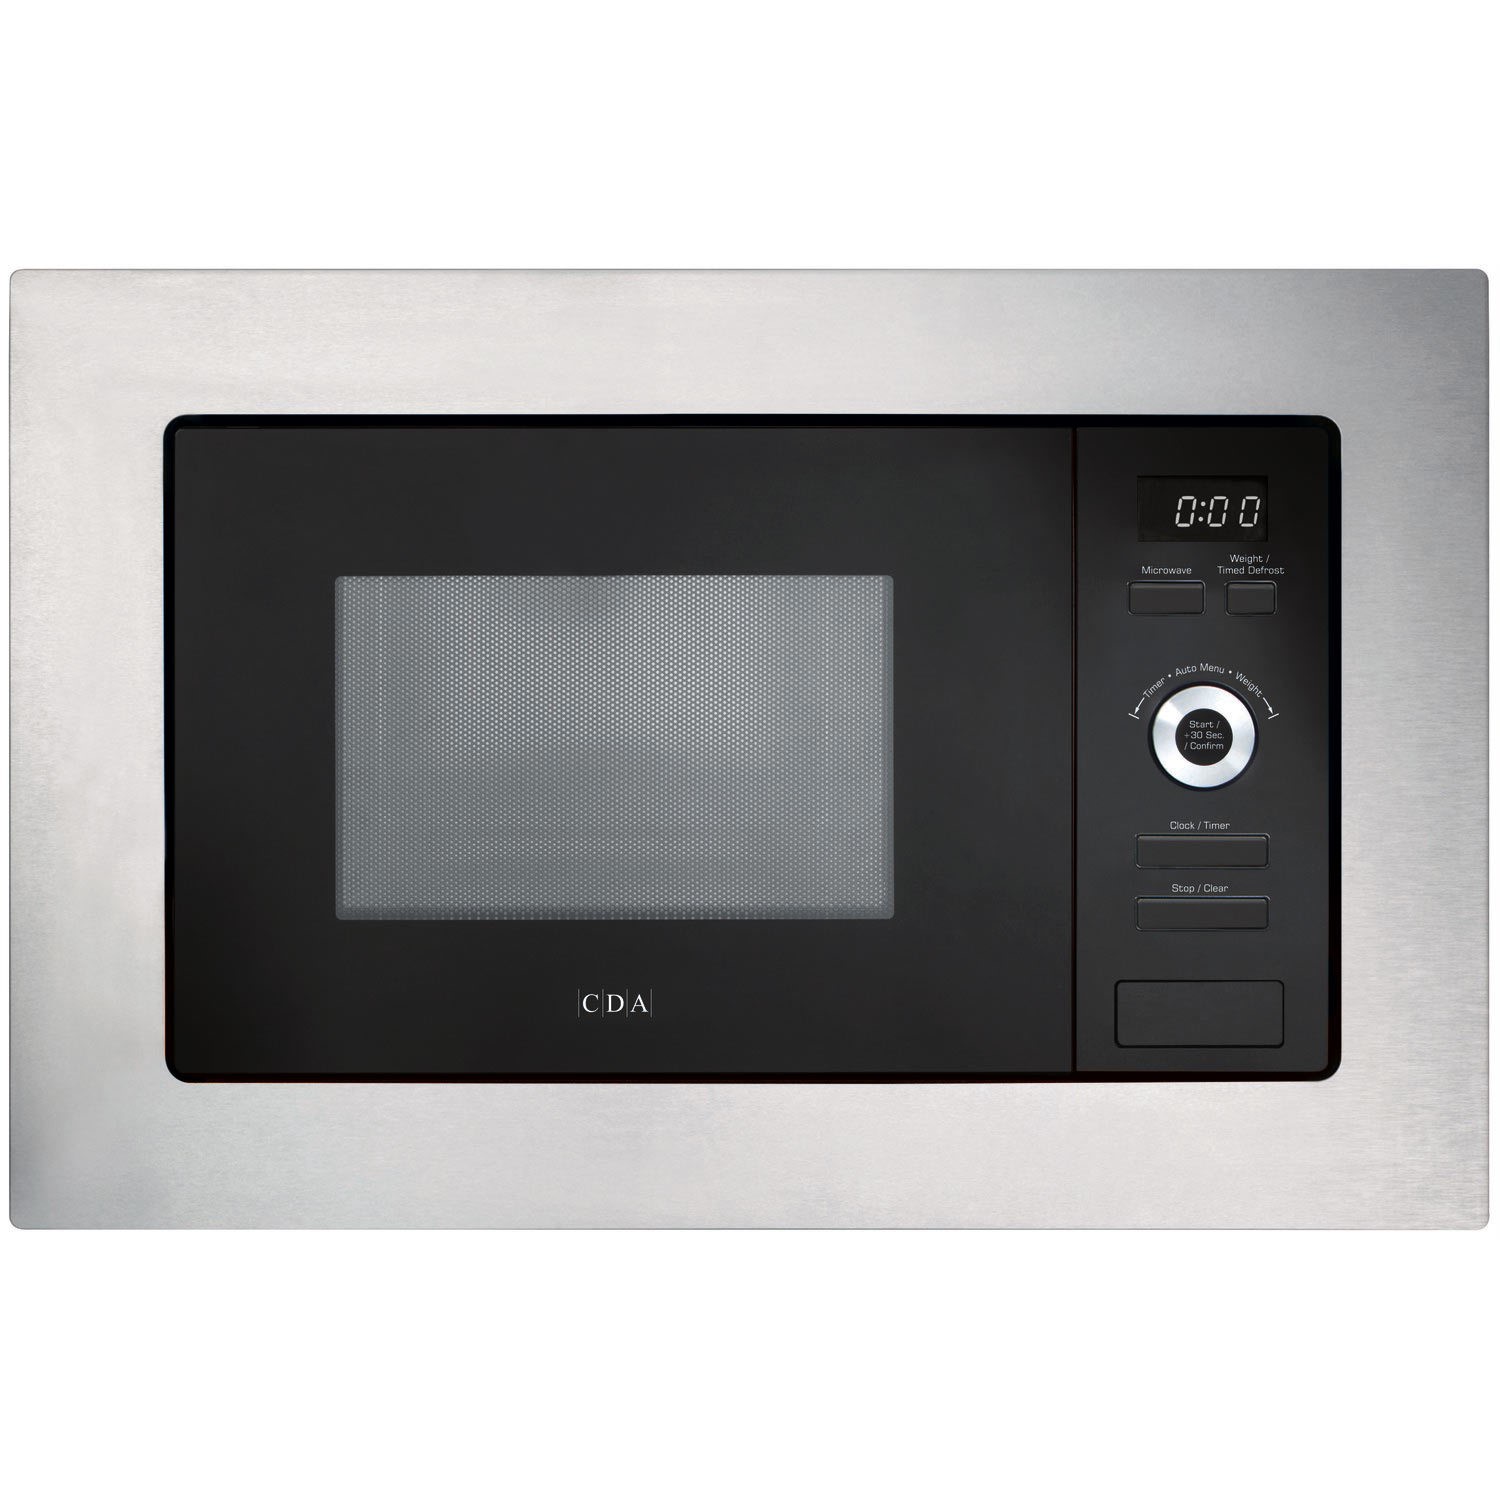 CDA 700W 17L Built-in Microwave Oven - Stainless Steel